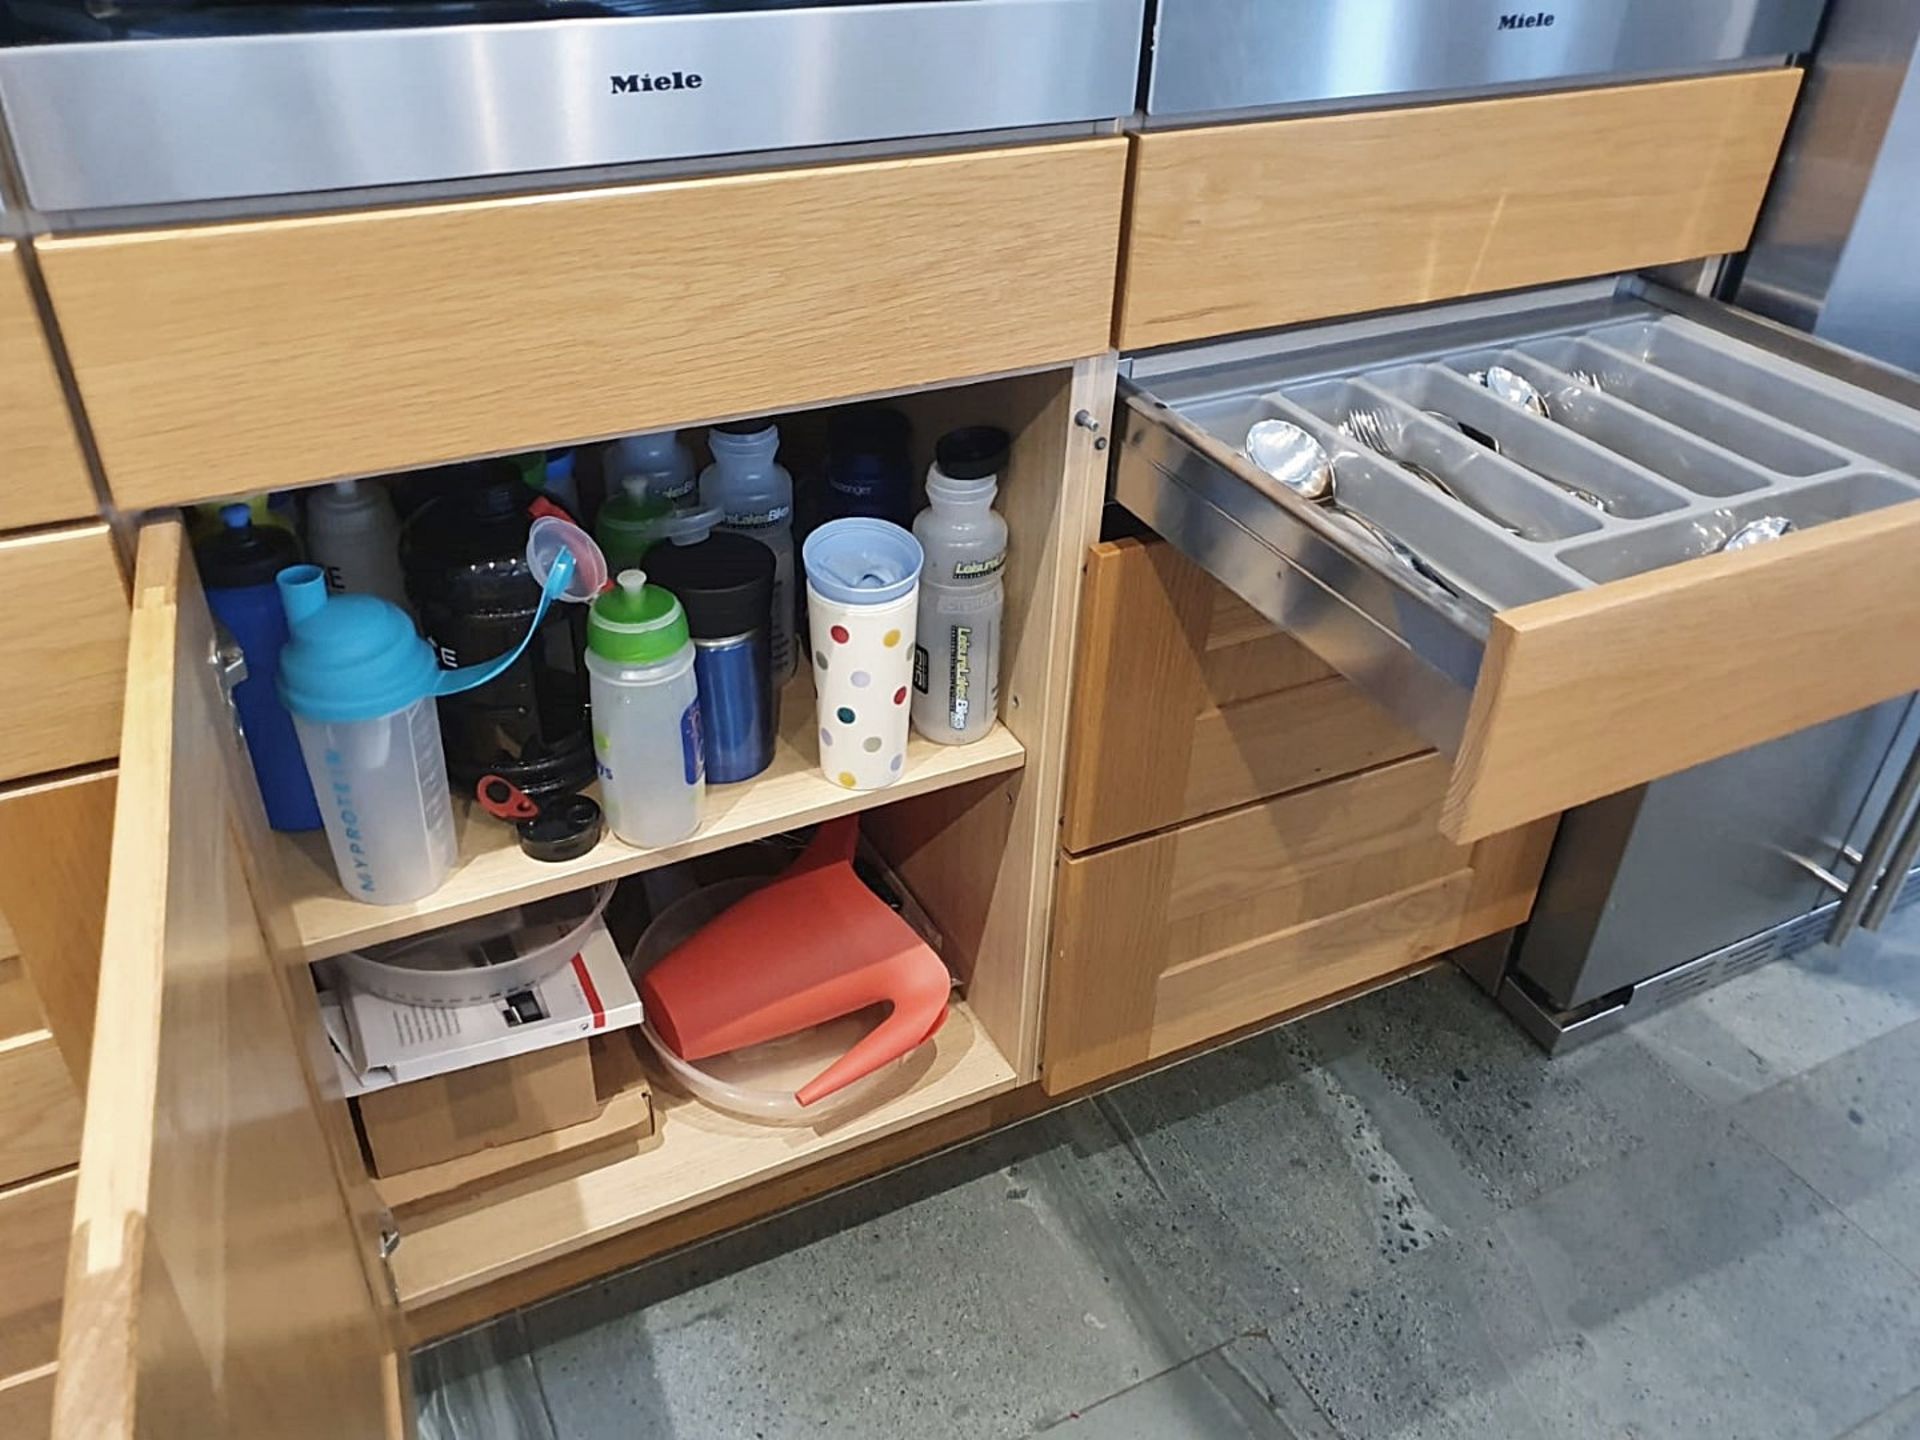 1 x Solid Oak Fitted Kitchen With Intergrated Miele Appliancess - CL487 - Location: Wigan *NO VAT* - Image 77 of 82